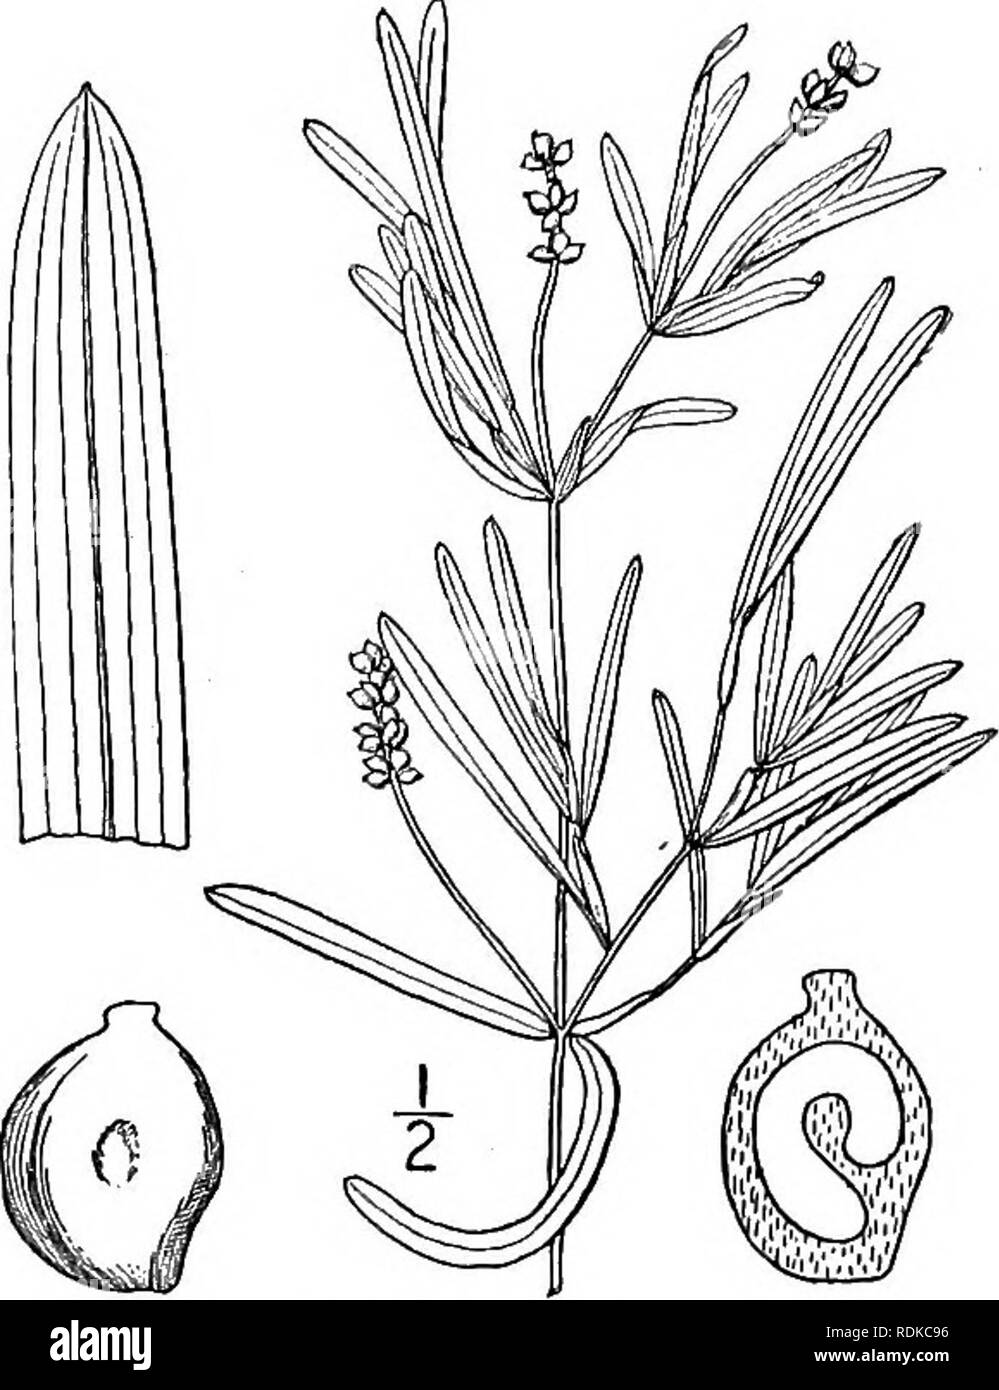 . An illustrated flora of the northern United States, Canada and the British possessions, from Newfoundland to the parallel of the southern boundary of Virginia, and from the Atlantic Ocean westward to the 102d meridian. Botany; Botany. Genus i. PONDWEED FAMILY. §3 23. Potamogeton Friesii Ruprecht. Pondweed. Fig. 196. Fries' Bot. 3:. Potamogeton compressus J. E. Smith, Engl. pi. 418. 1794. Not L. 1753. Potamogeton pusillus var. major Fries, Novit. Ed. 2, 48. 1828. Potamogeton Friesii Ruprecht, Beitr. Pfl. Russ. Reichs, 4: 43- 1845. Potamogeton major Morong, Mem. Torr. Club, 3 : Part 2, 41. 189 Stock Photo